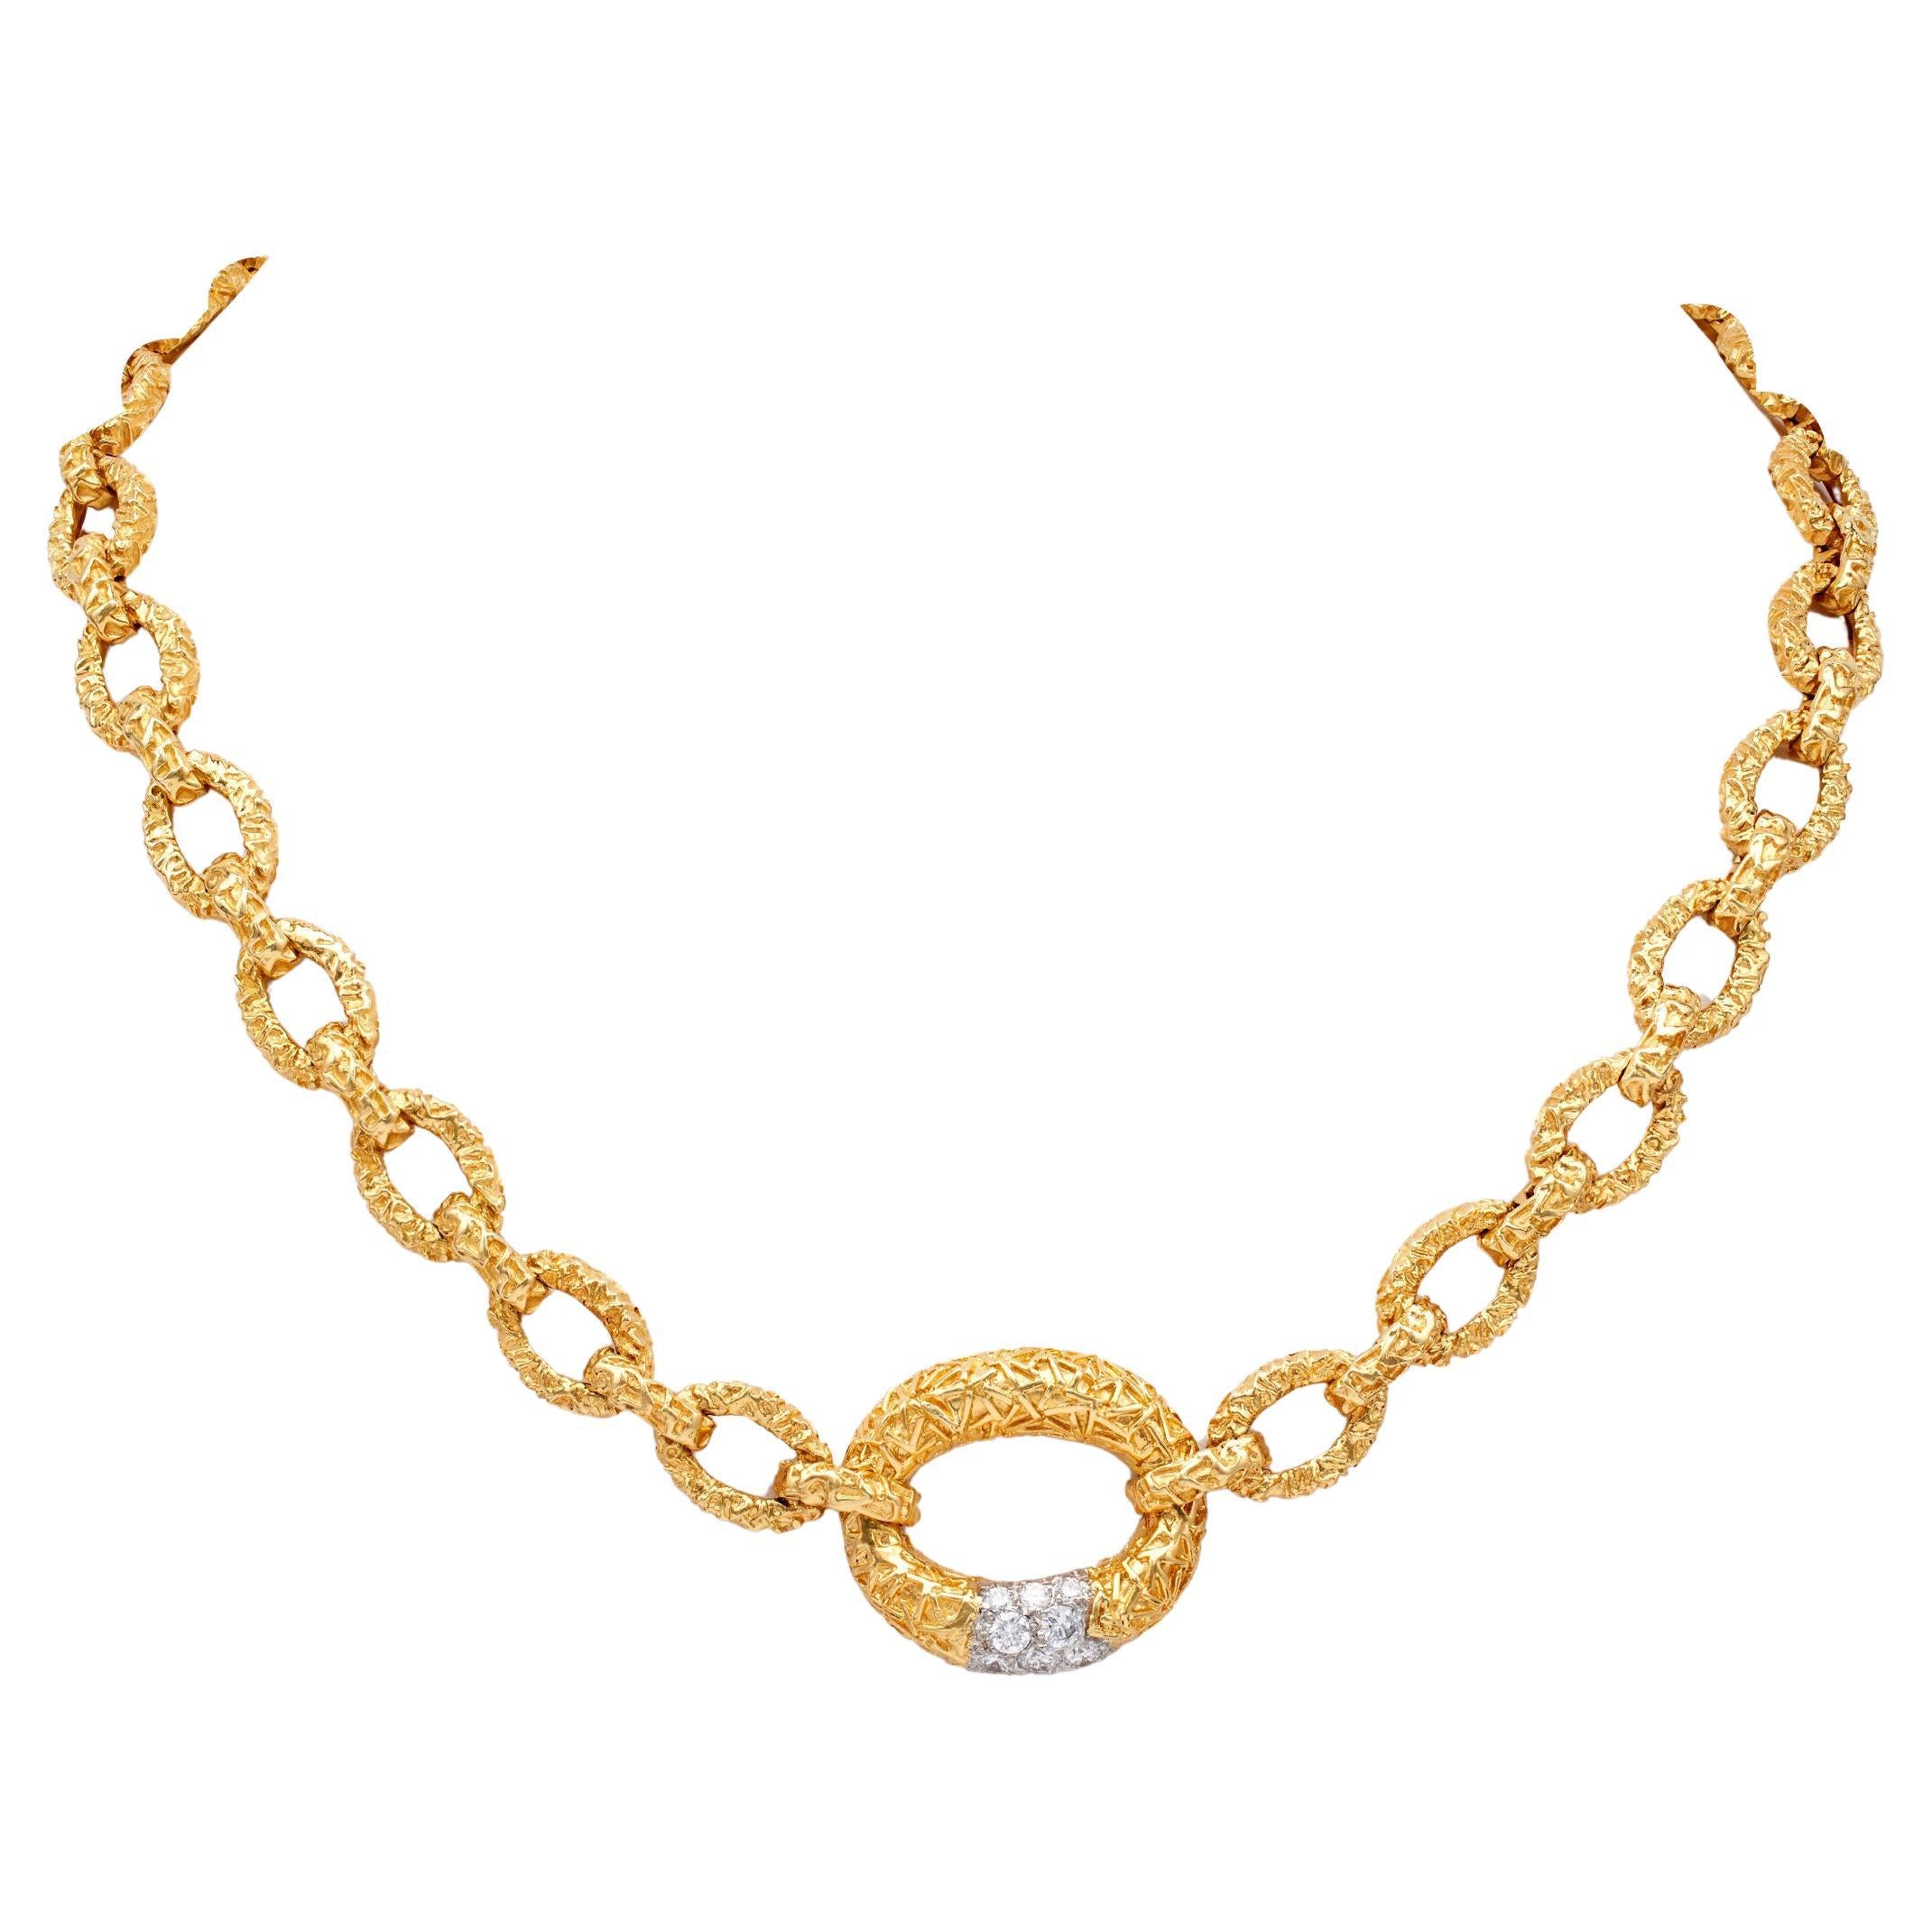 Vintage Van Cleef and Arpels Diamond 18k Yellow Gold Link Necklace For Sale